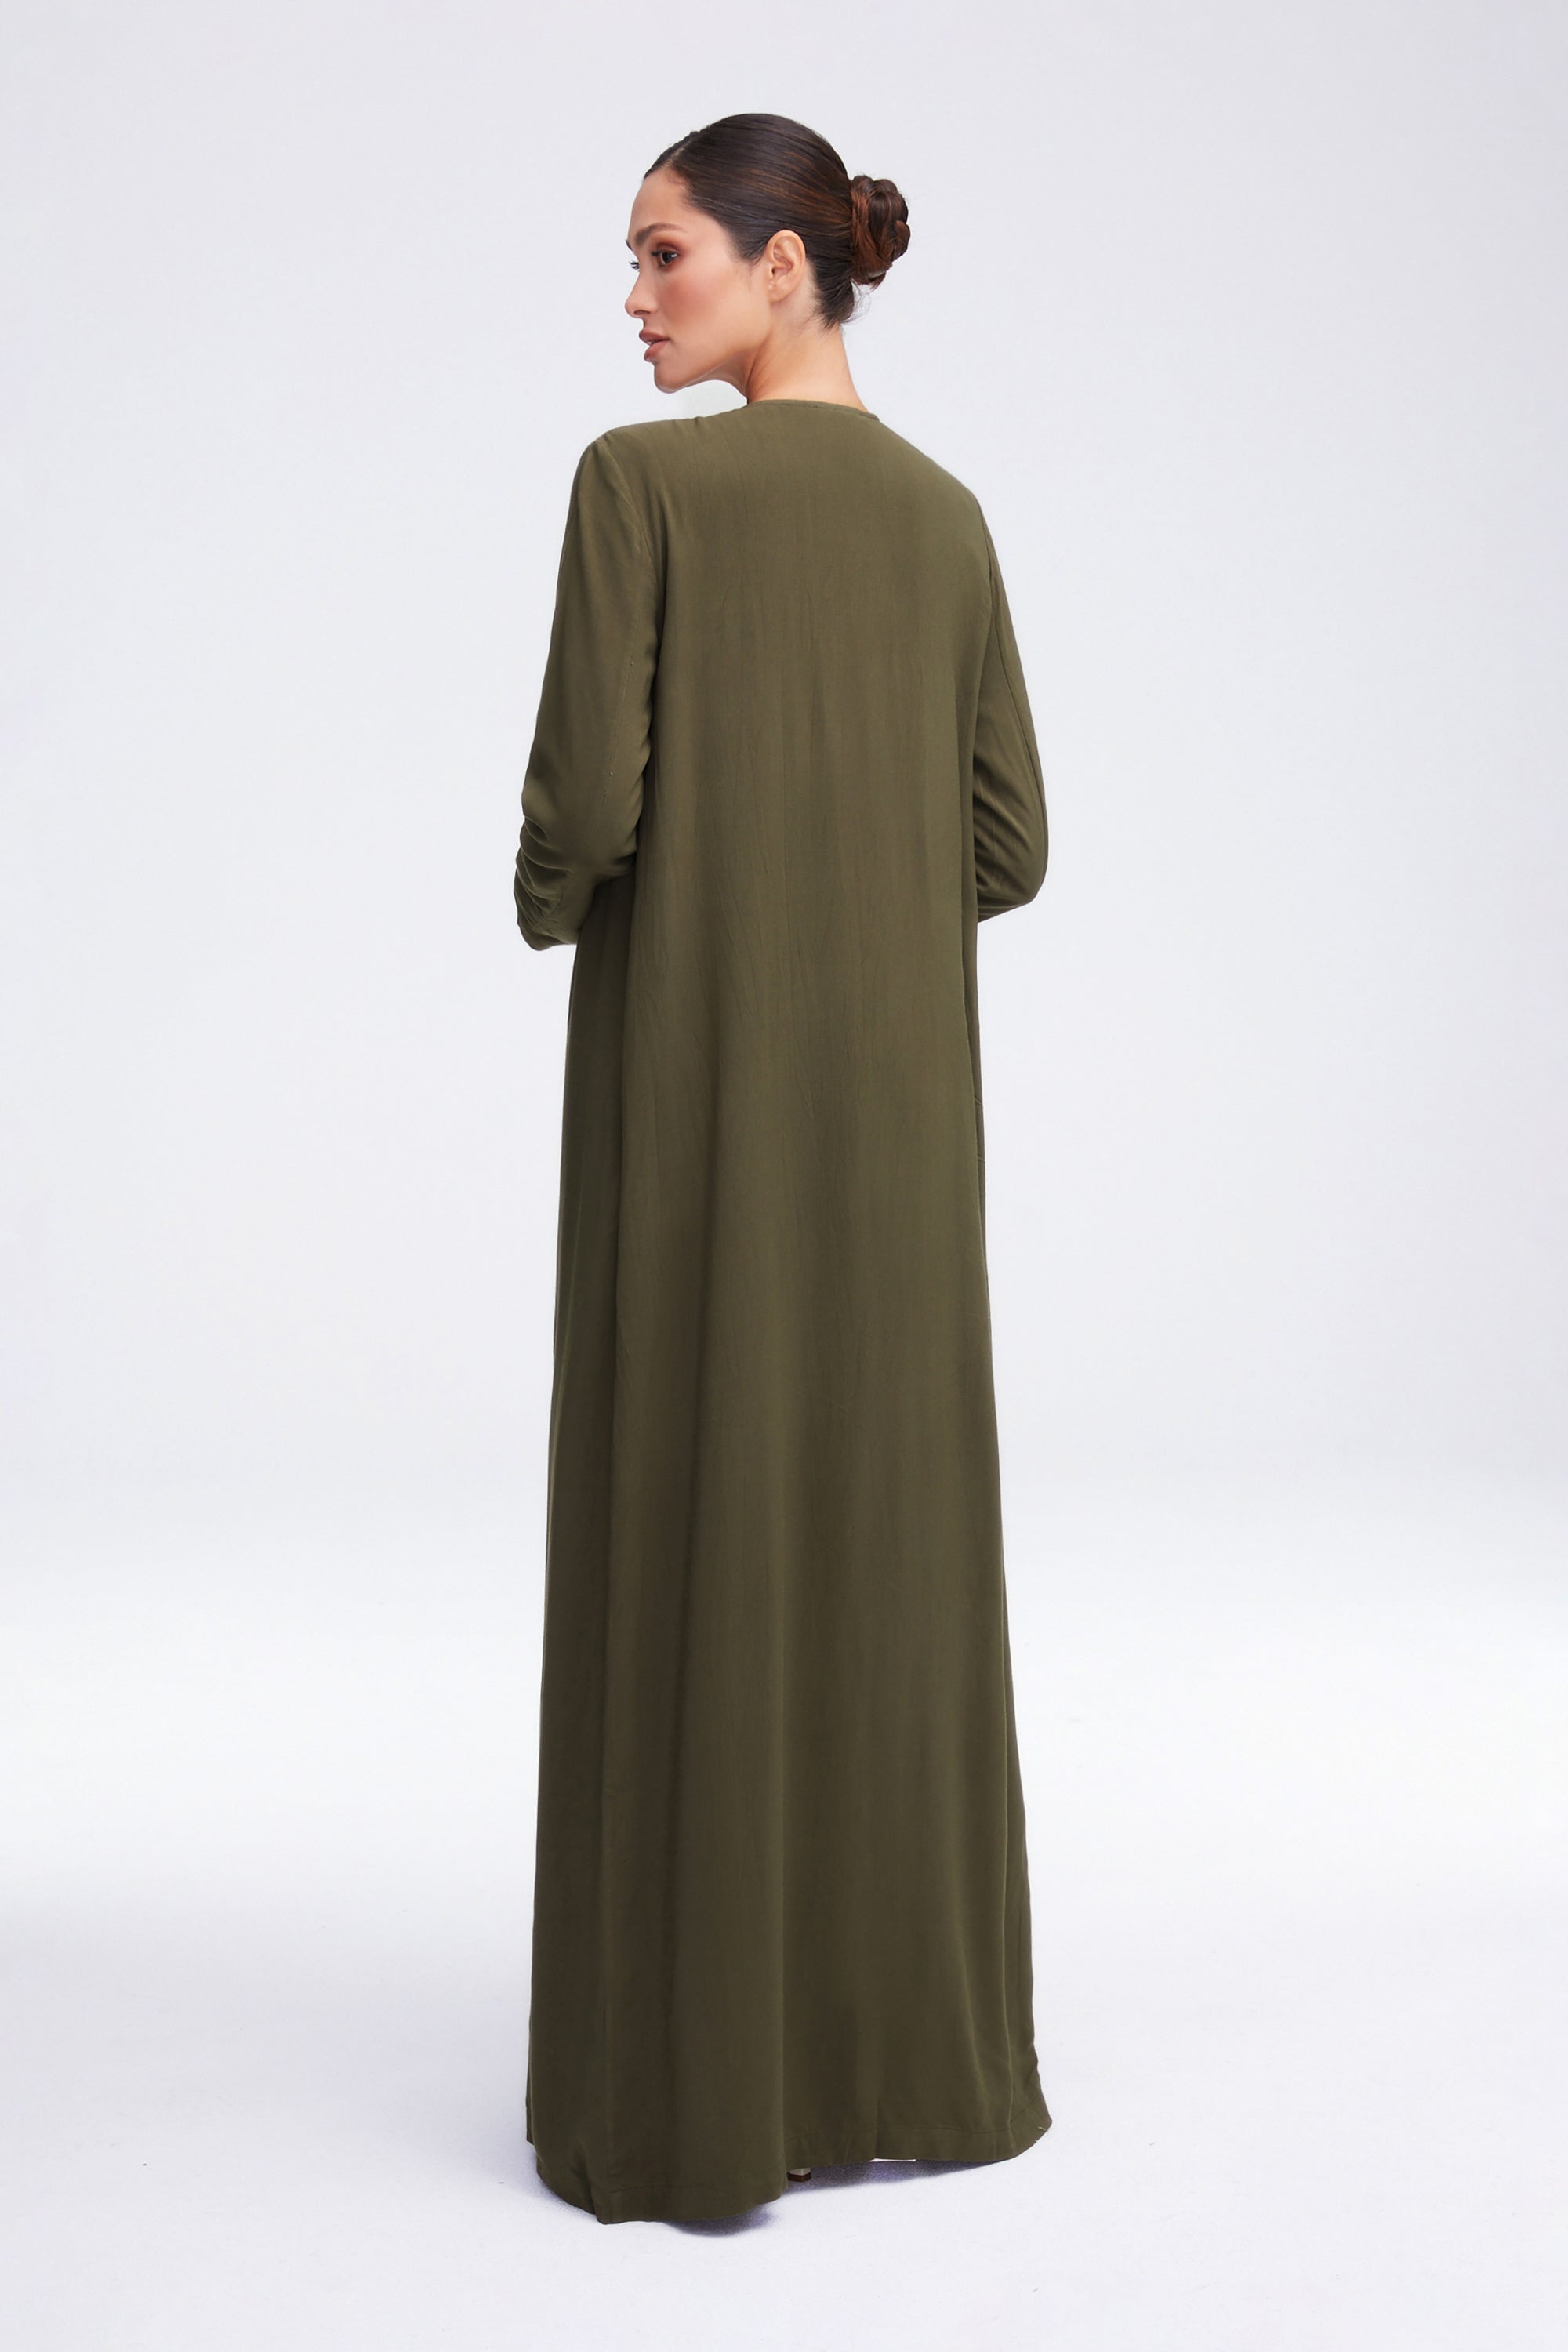 Essential Woven Open Abaya - Olive Clothing Veiled 